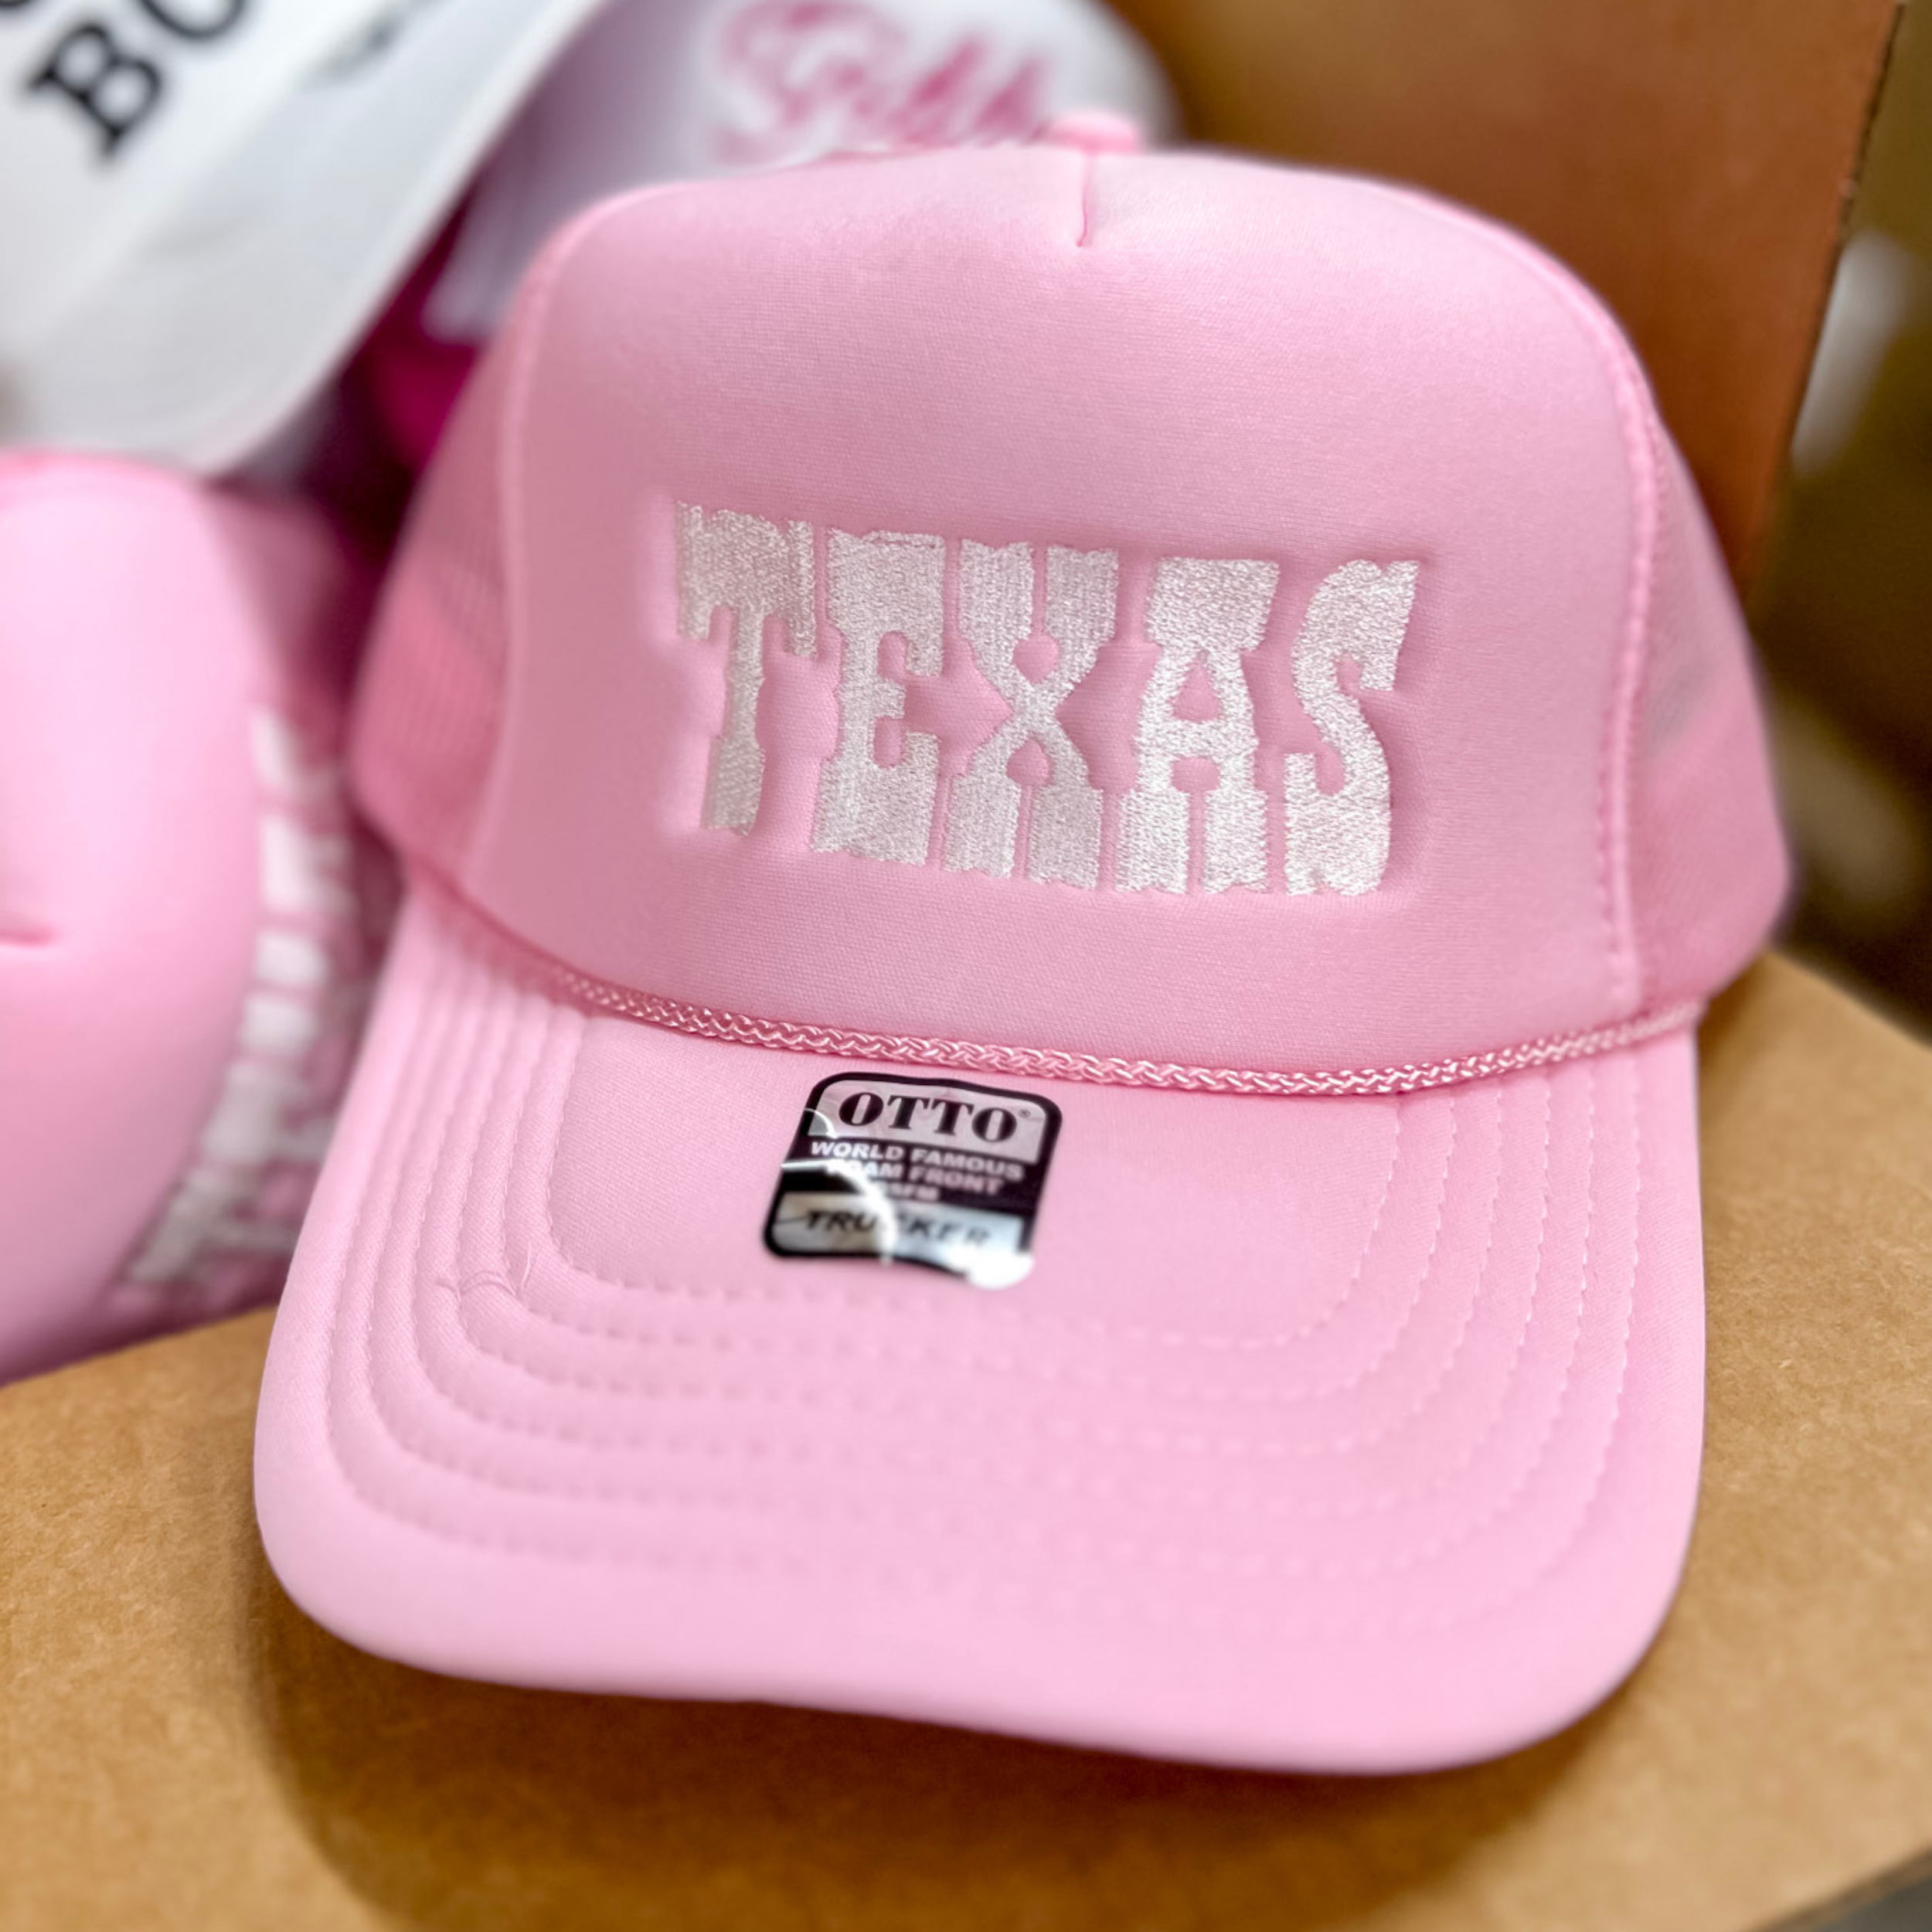 Photo features a light pink trucker hat with white bold embroidery of "Texas" on the front.